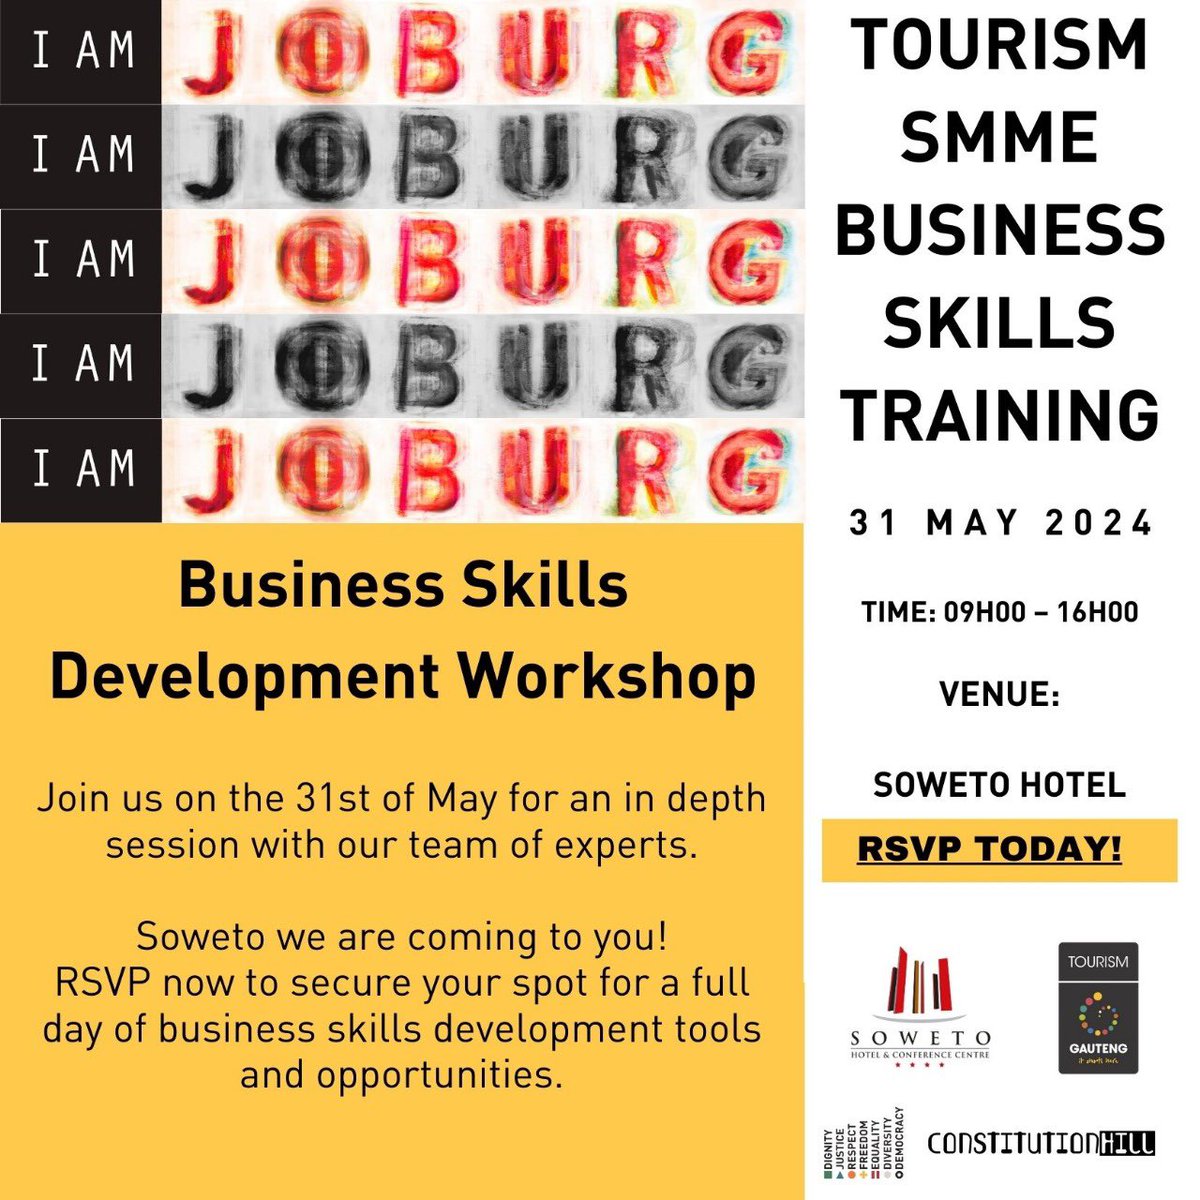 Soweto! We are coming to you! Register for the IAMJOBURG Tourism SMME Business Skills Development Workshop on the 31st of May at the Soweto Hotel. Space is limited, register now: forms.gle/HGE3bh1PgYcCFv… #IAMJOBURG #ILoveGauteng #TourismStrong